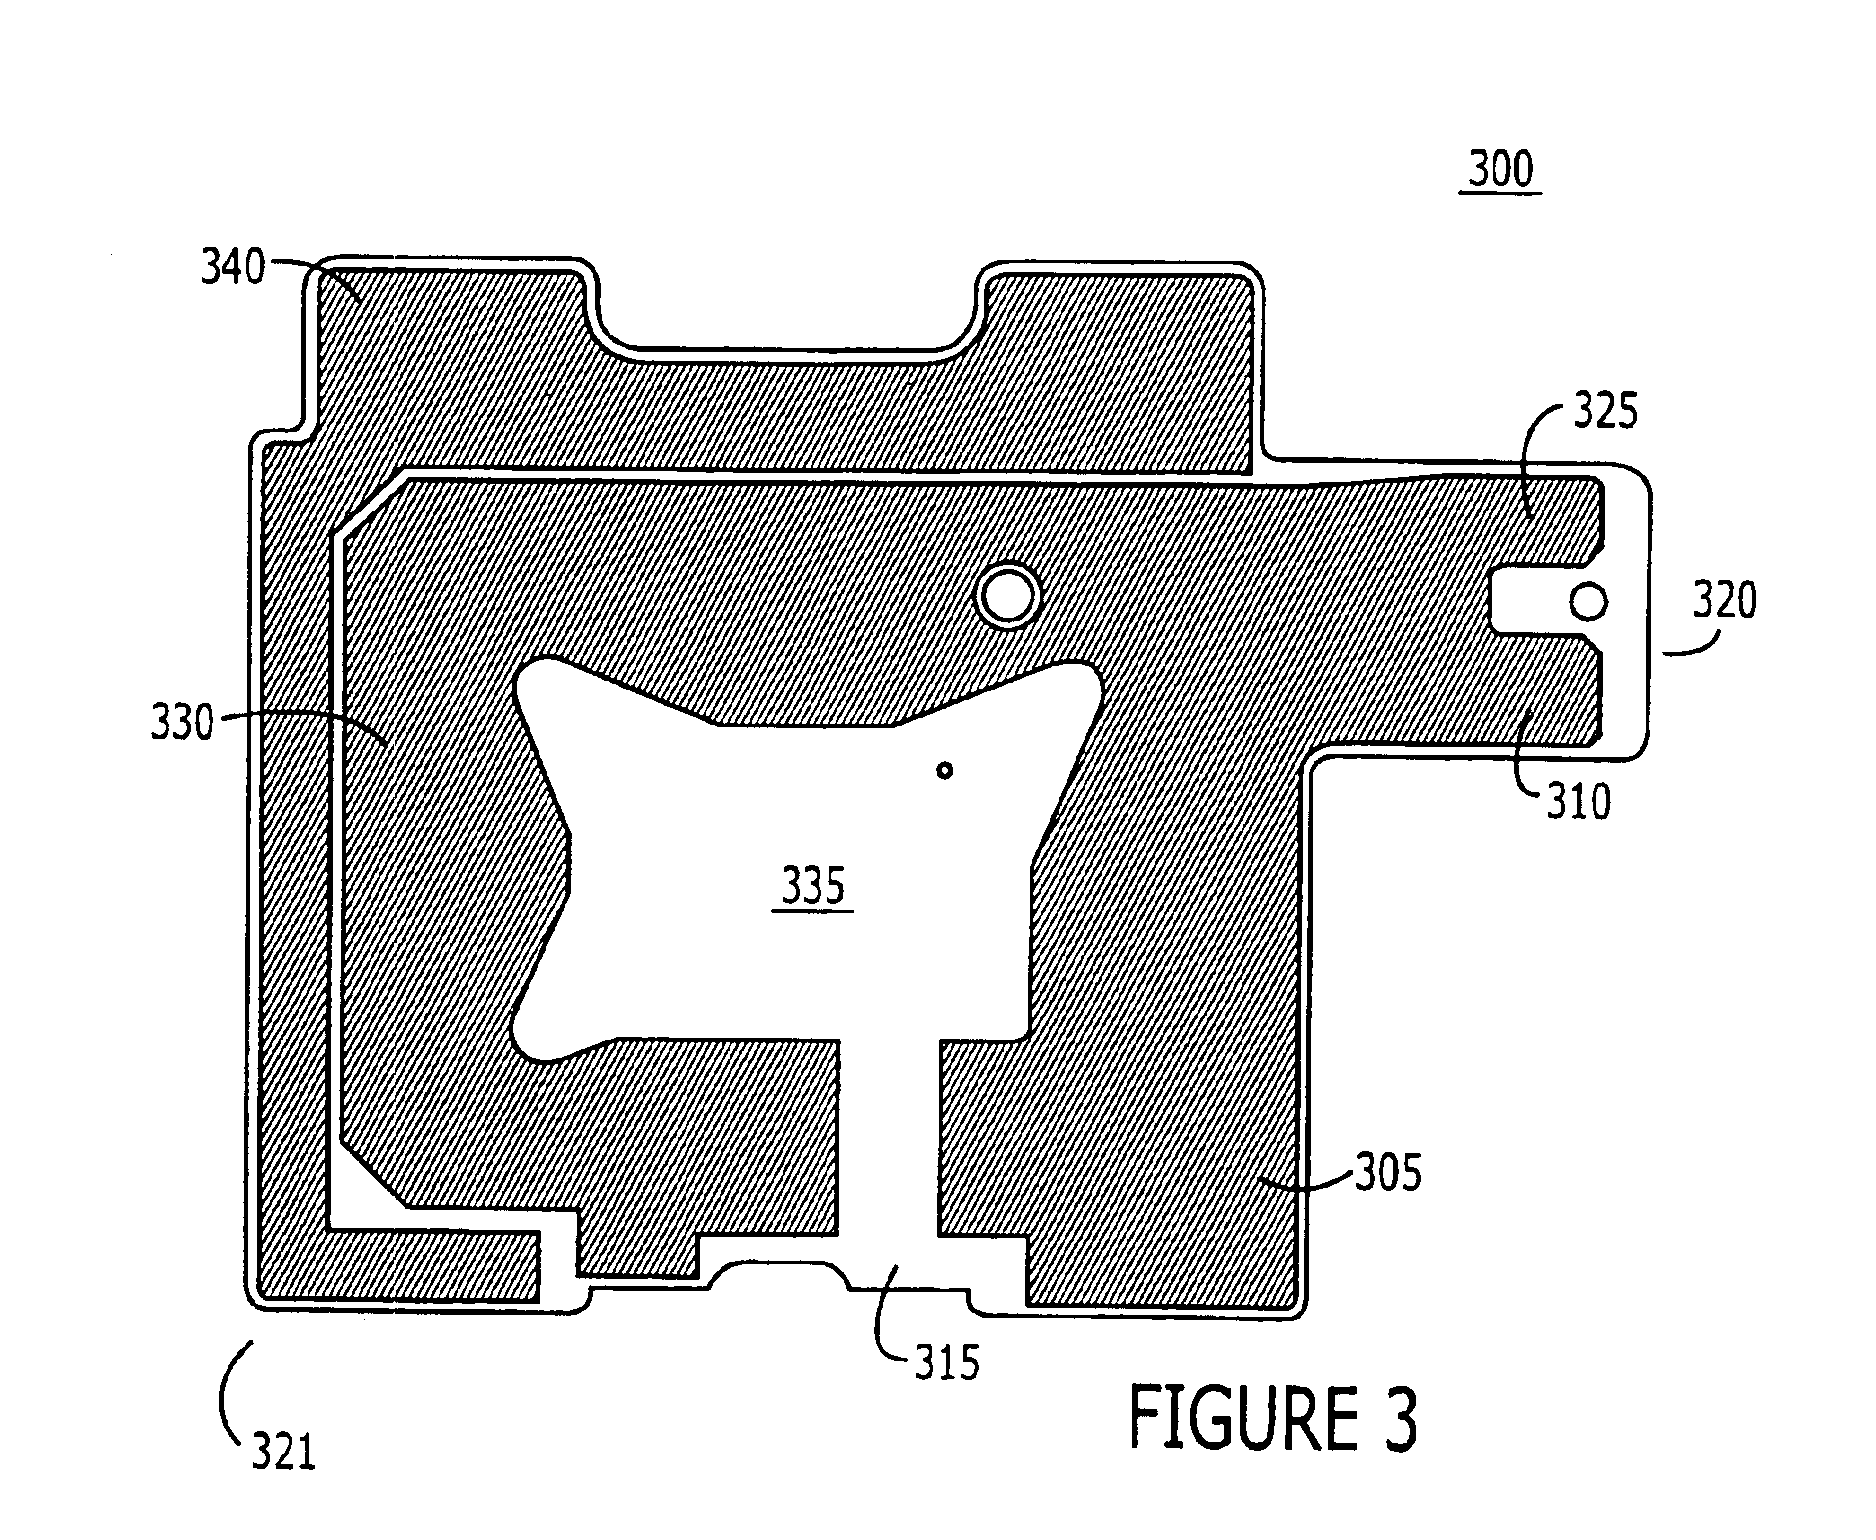 Multi-band planar inverted-F antennas including floating parasitic elements and wireless terminals incorporating the same